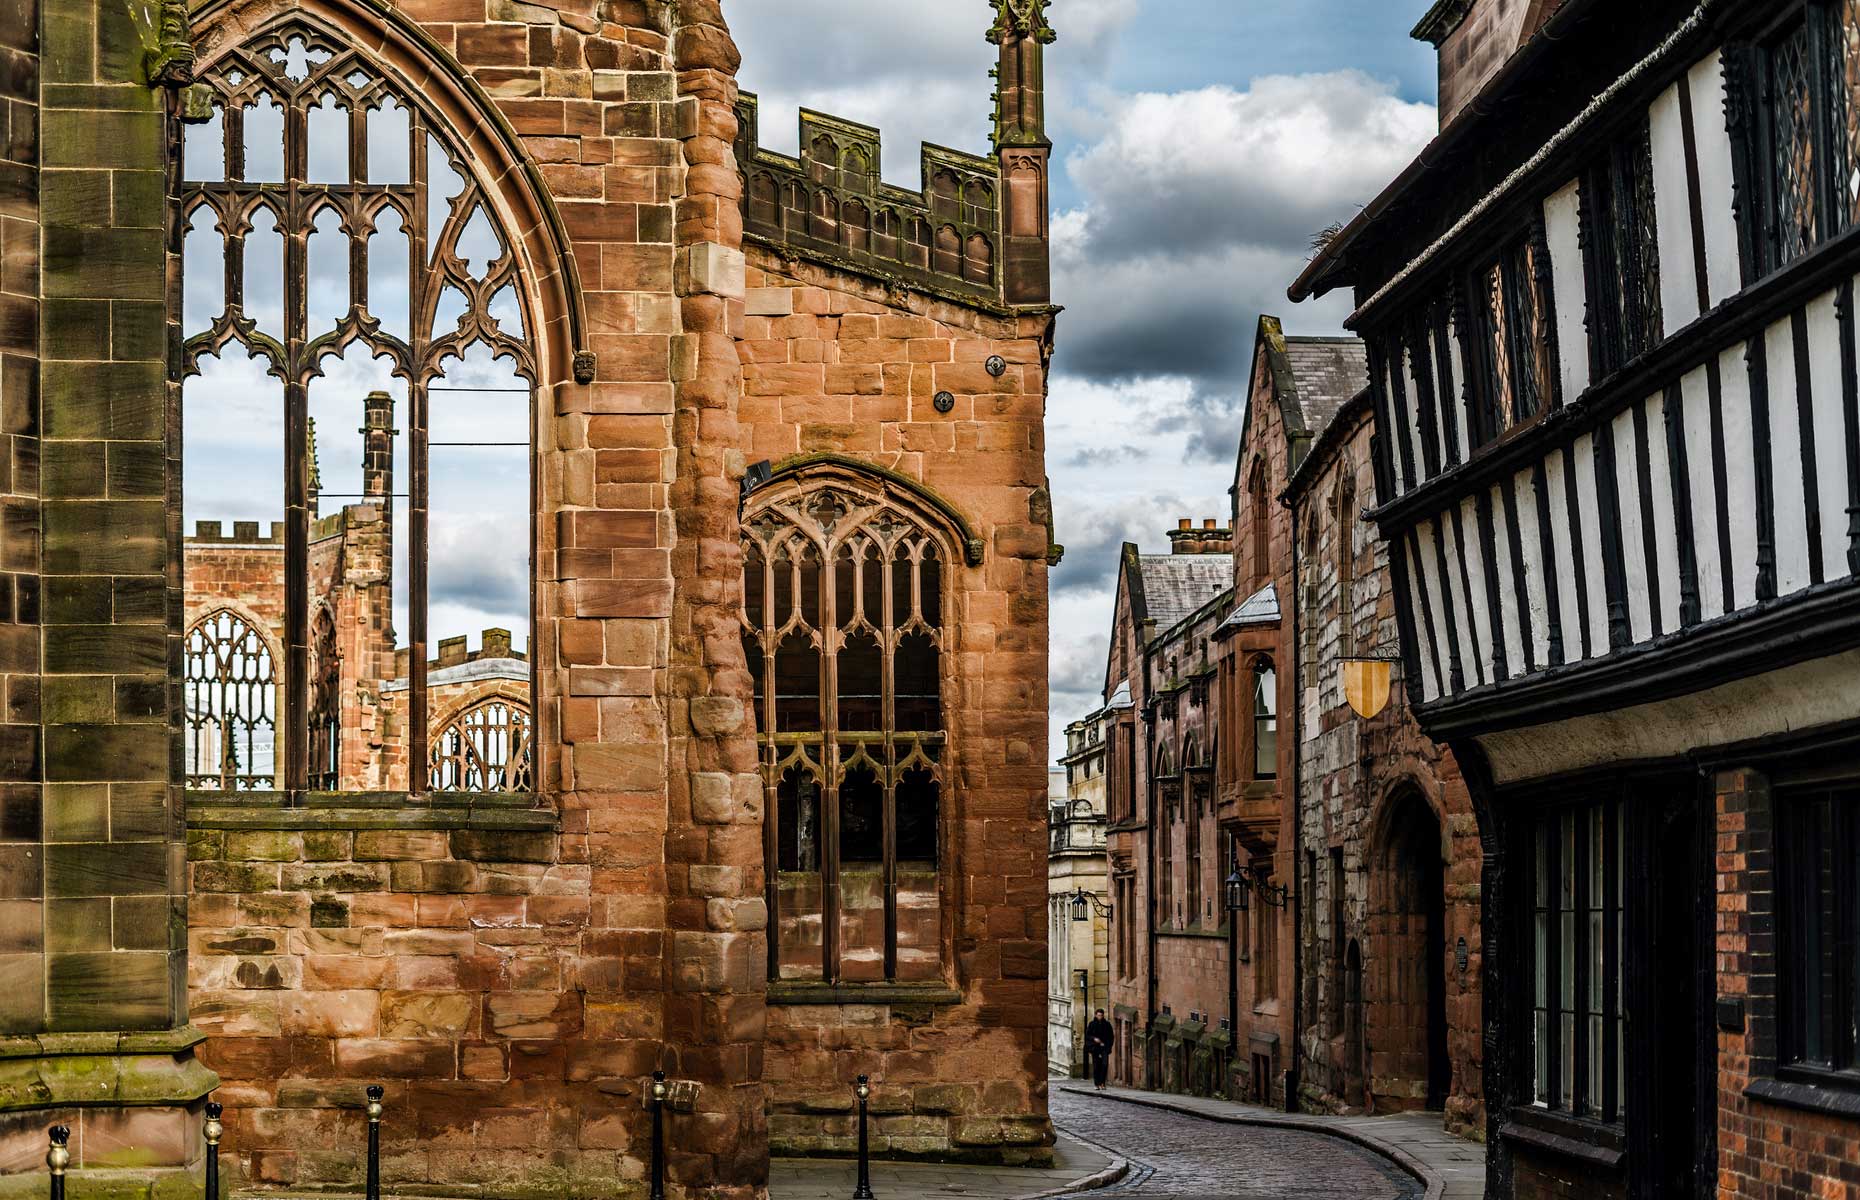 Coventry Cathedral (Image: nrqemi/Shutterstock)